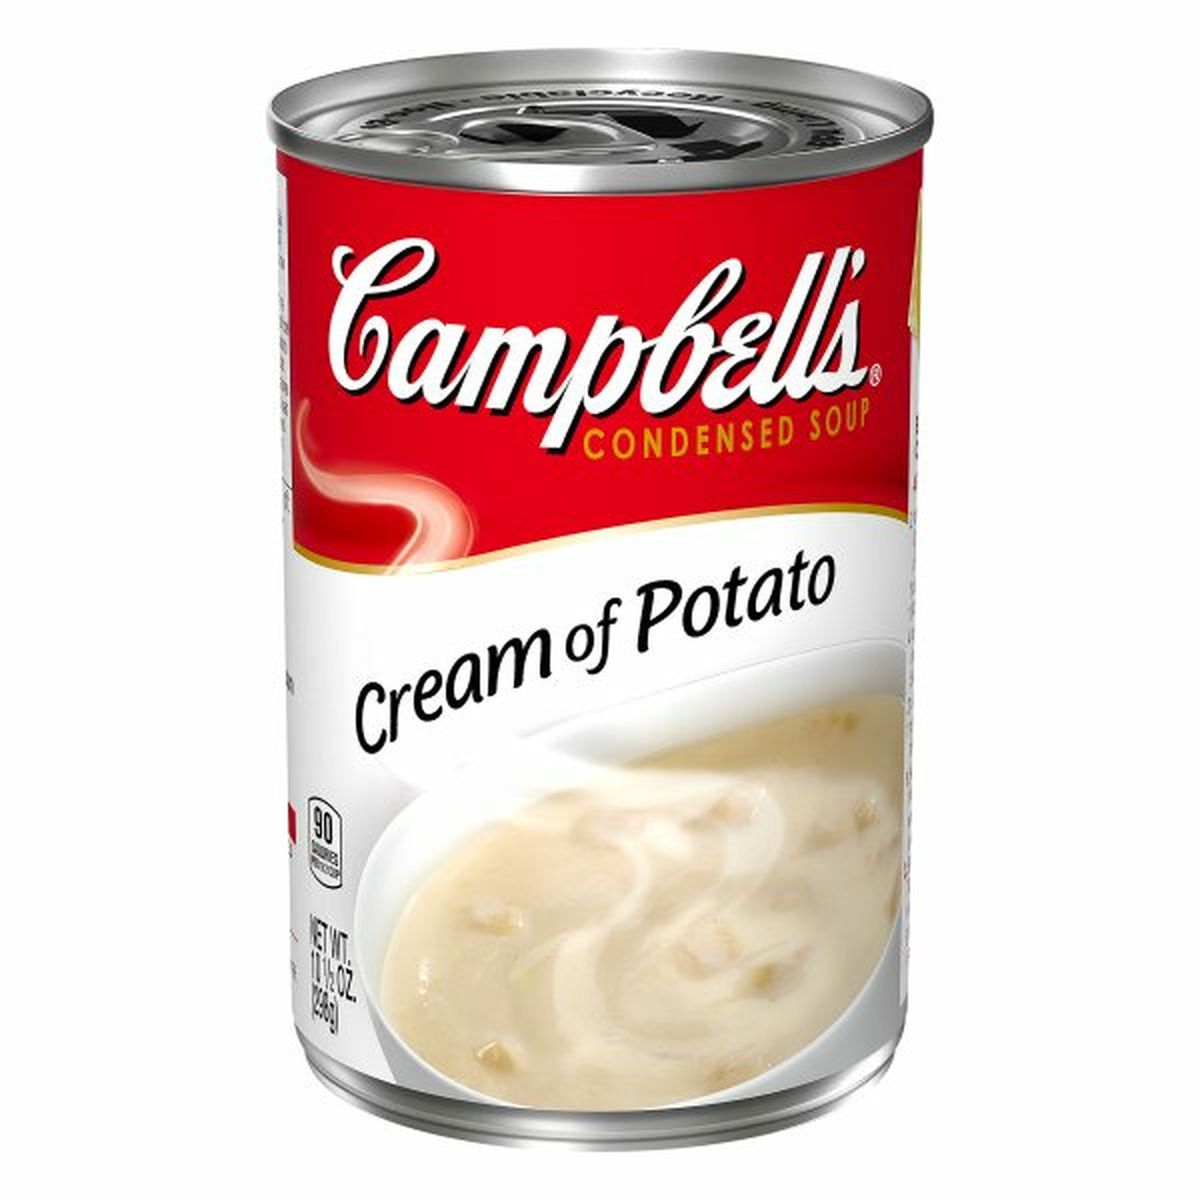 Calories in Campbell'ss Soup, Condensed, Cream of Potato